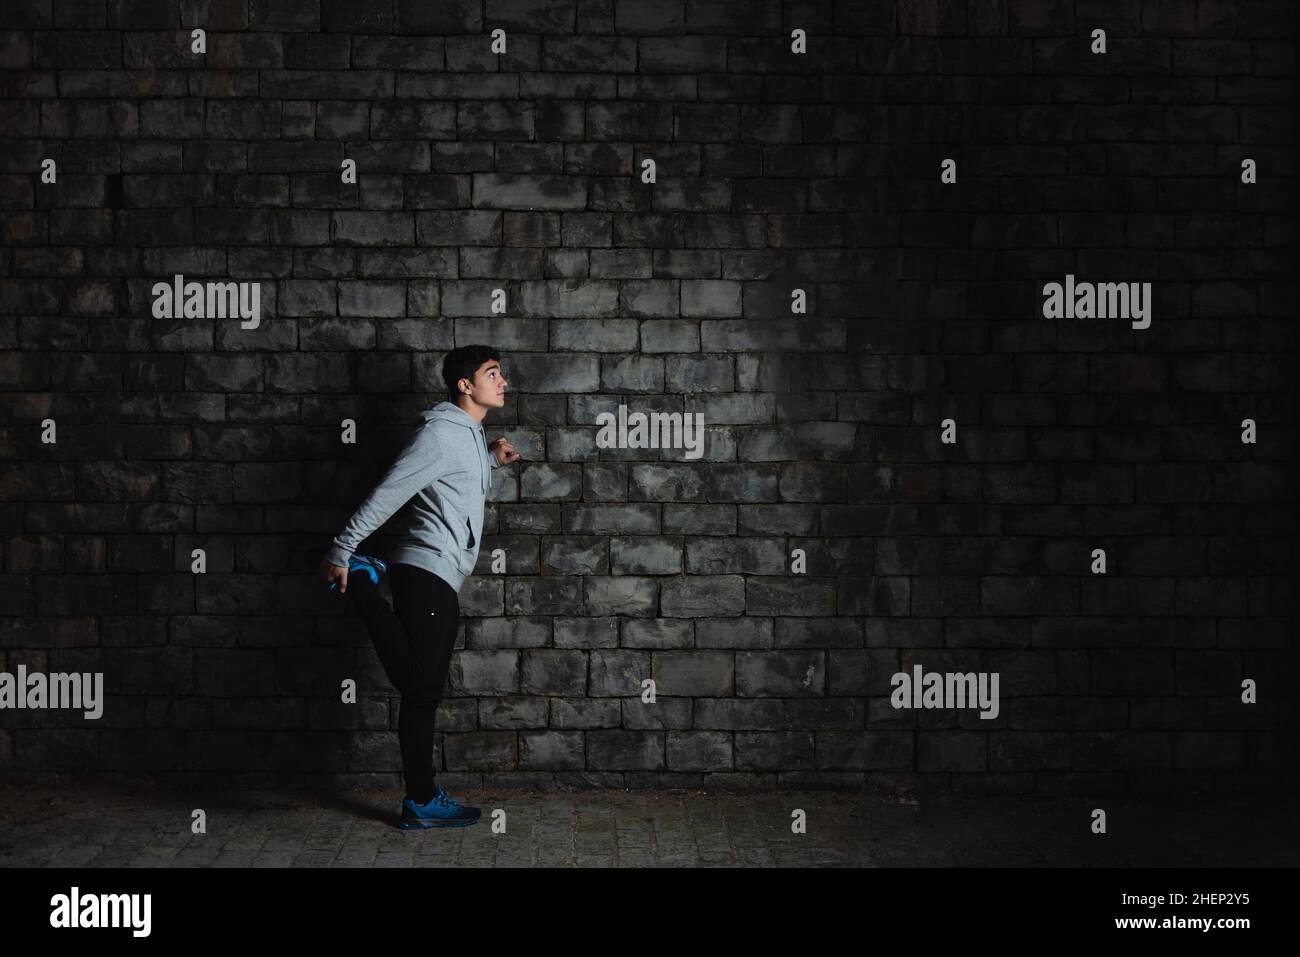 Hispanic teenager sportsman stretching against wall in the darkness. Stock Photo